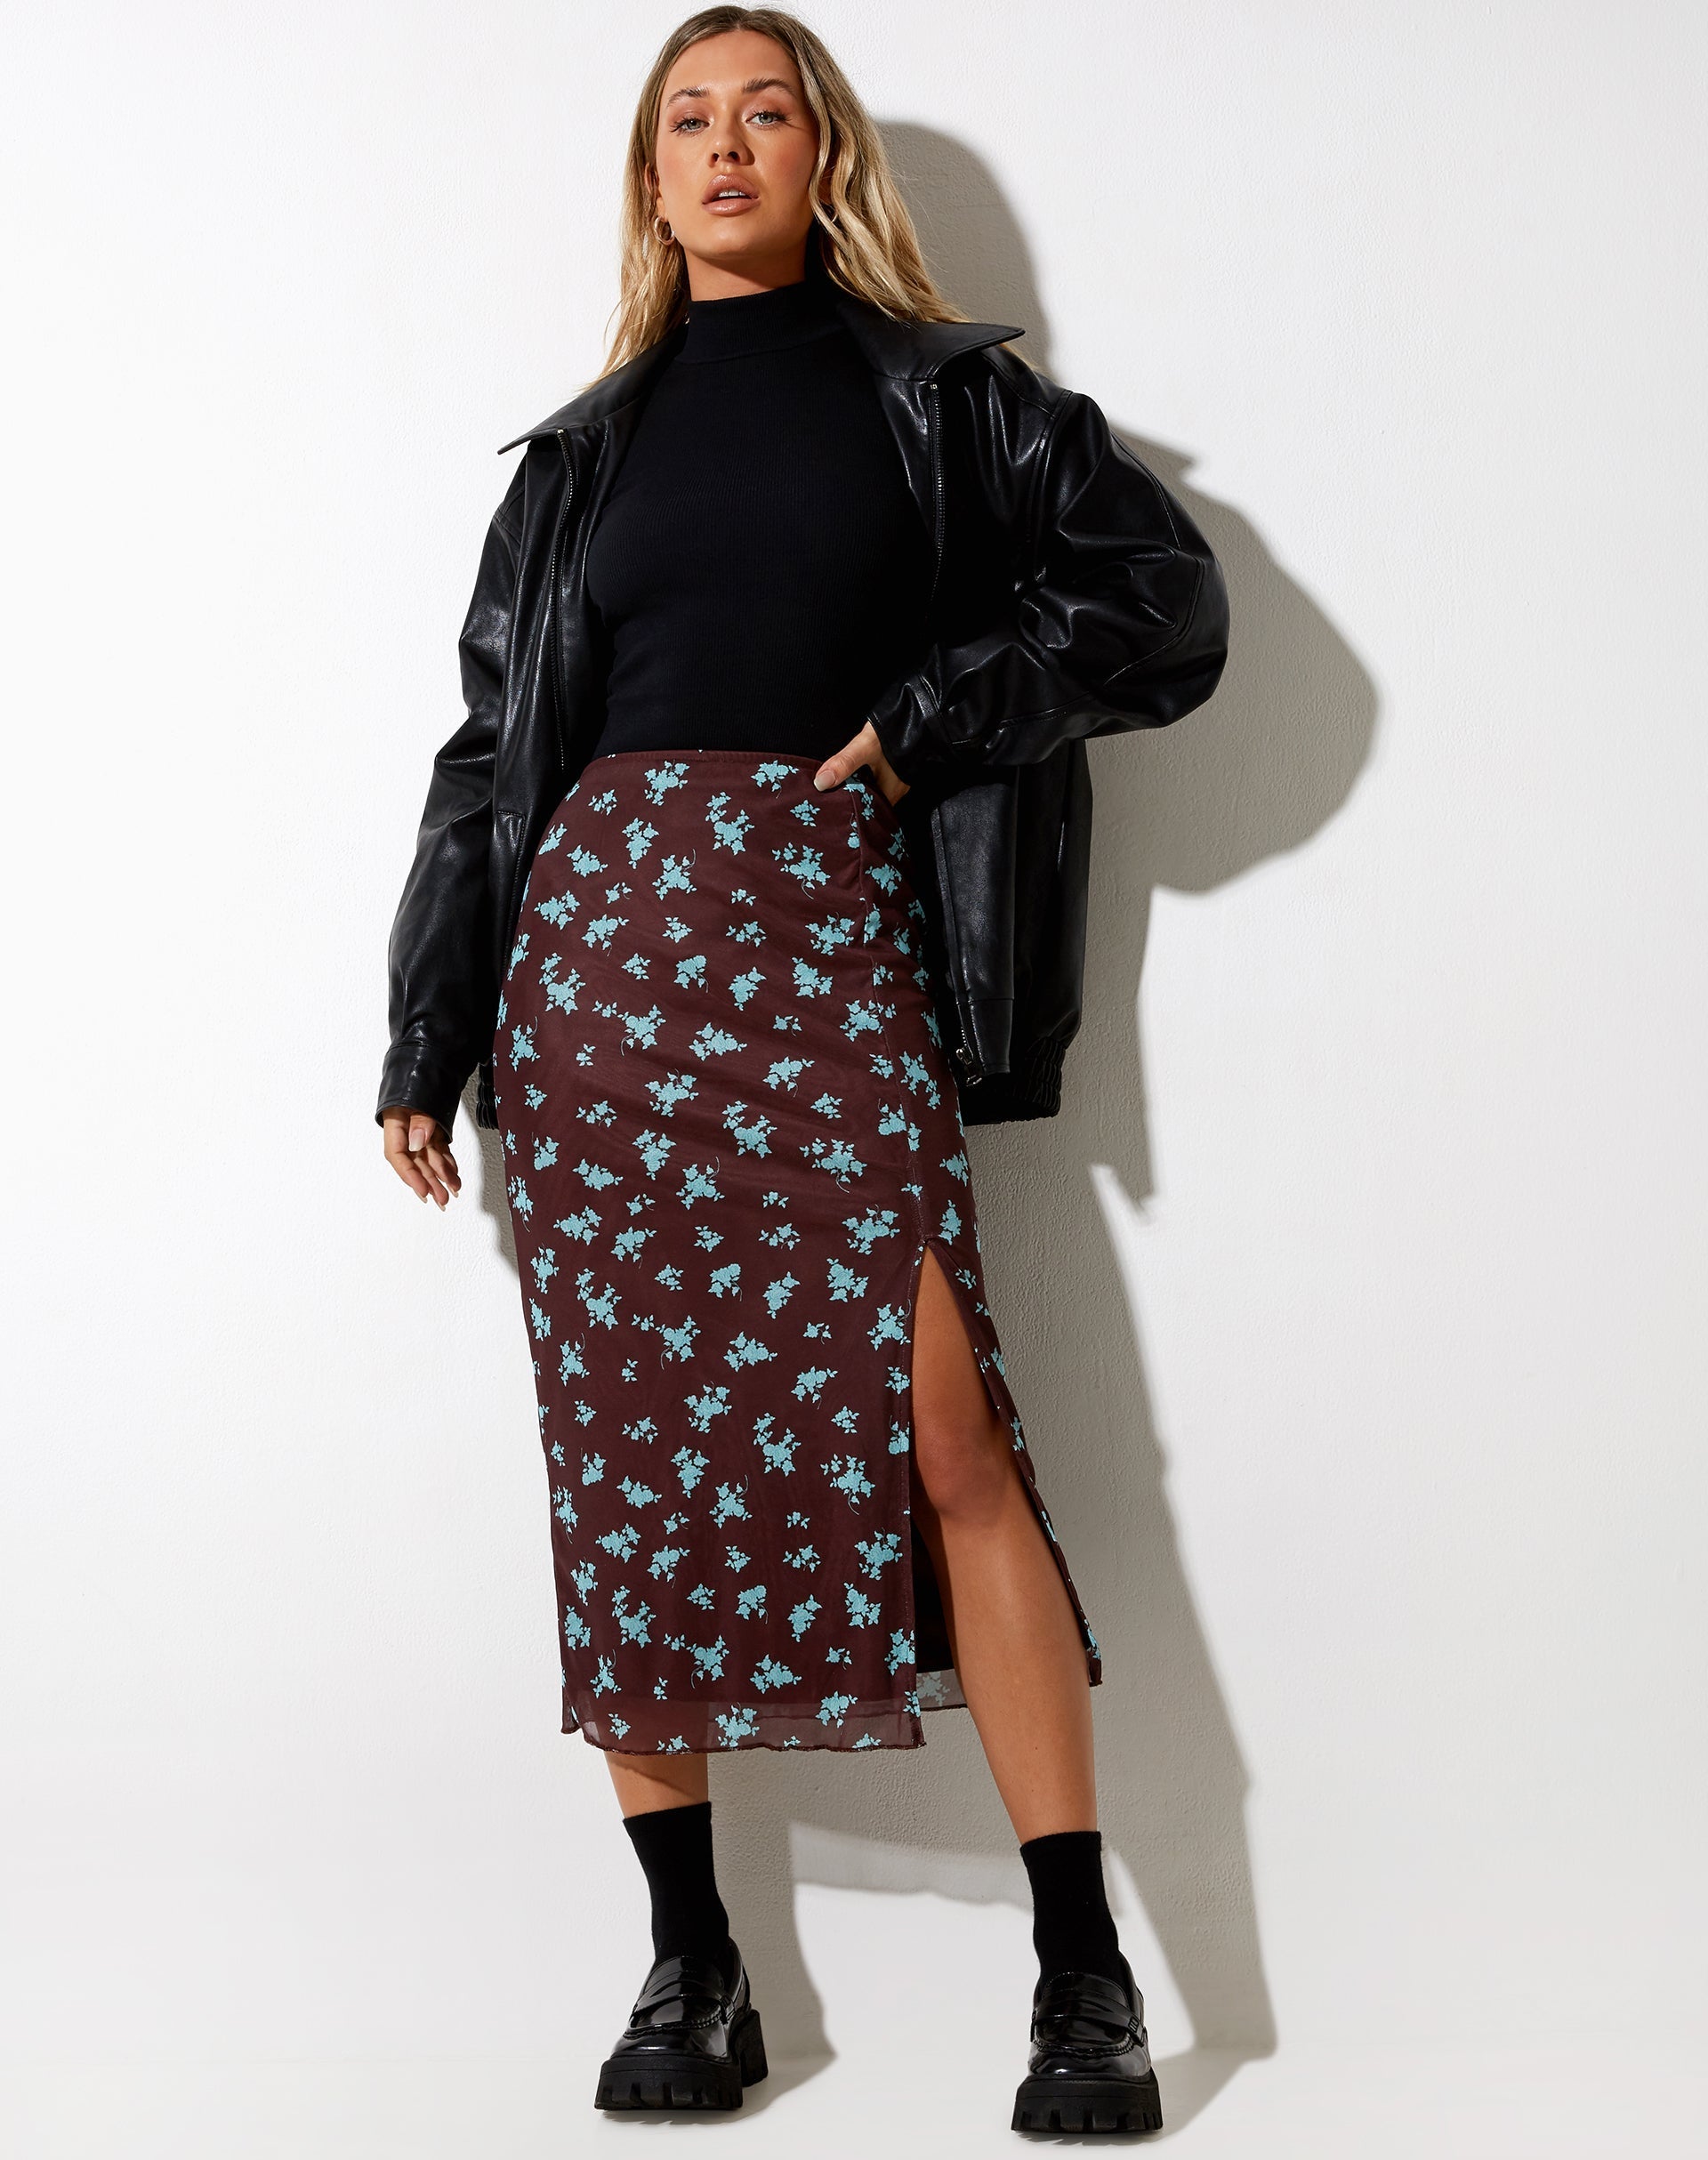 Rindai Midi Skirt in Femme Floral Blue and Brown